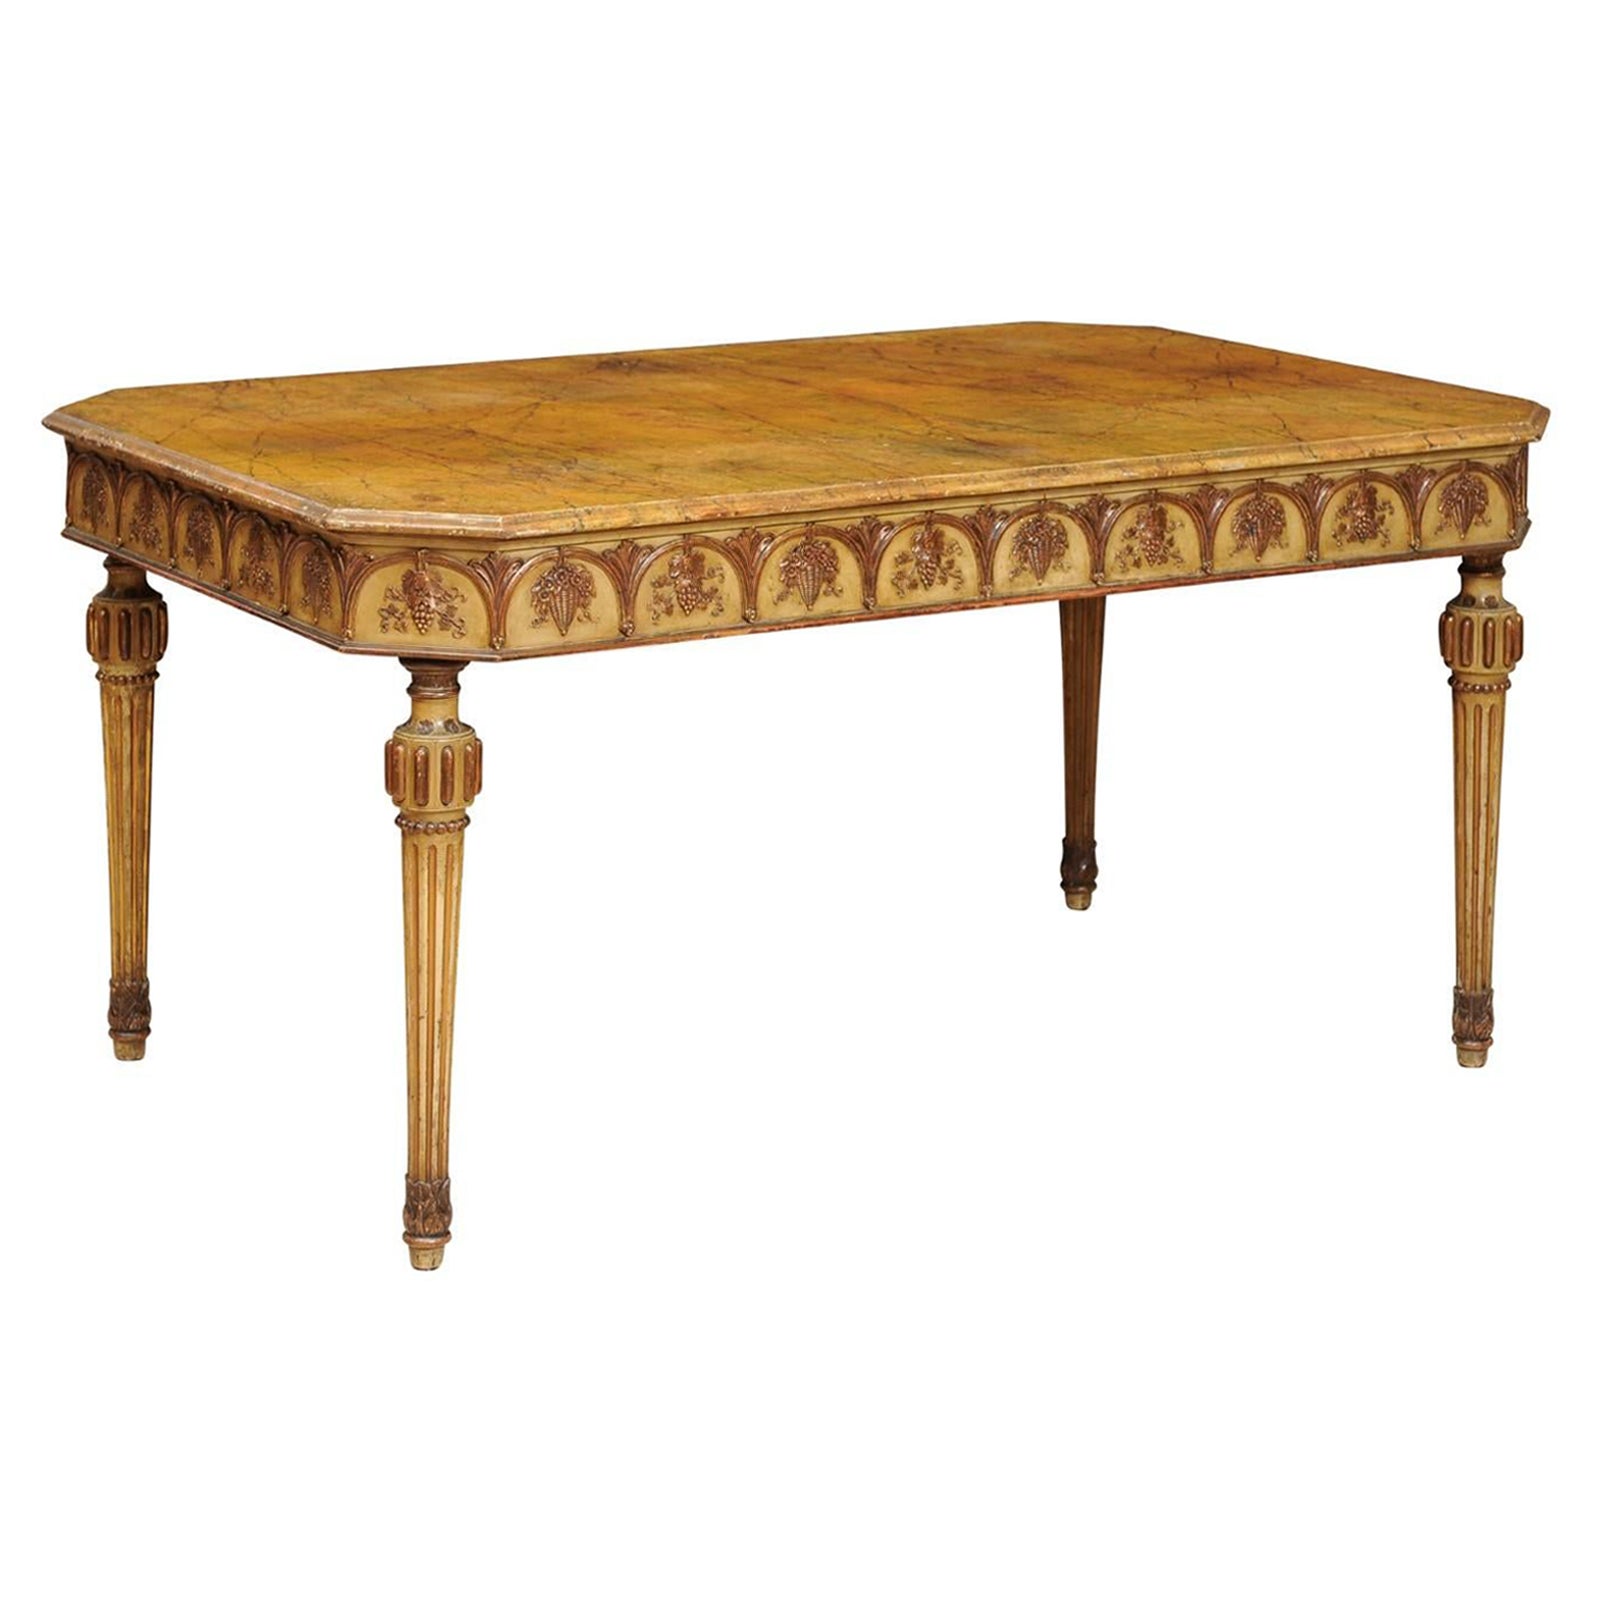 Italian Neapolitan Style Painted Dining Table with Faux Marble Top